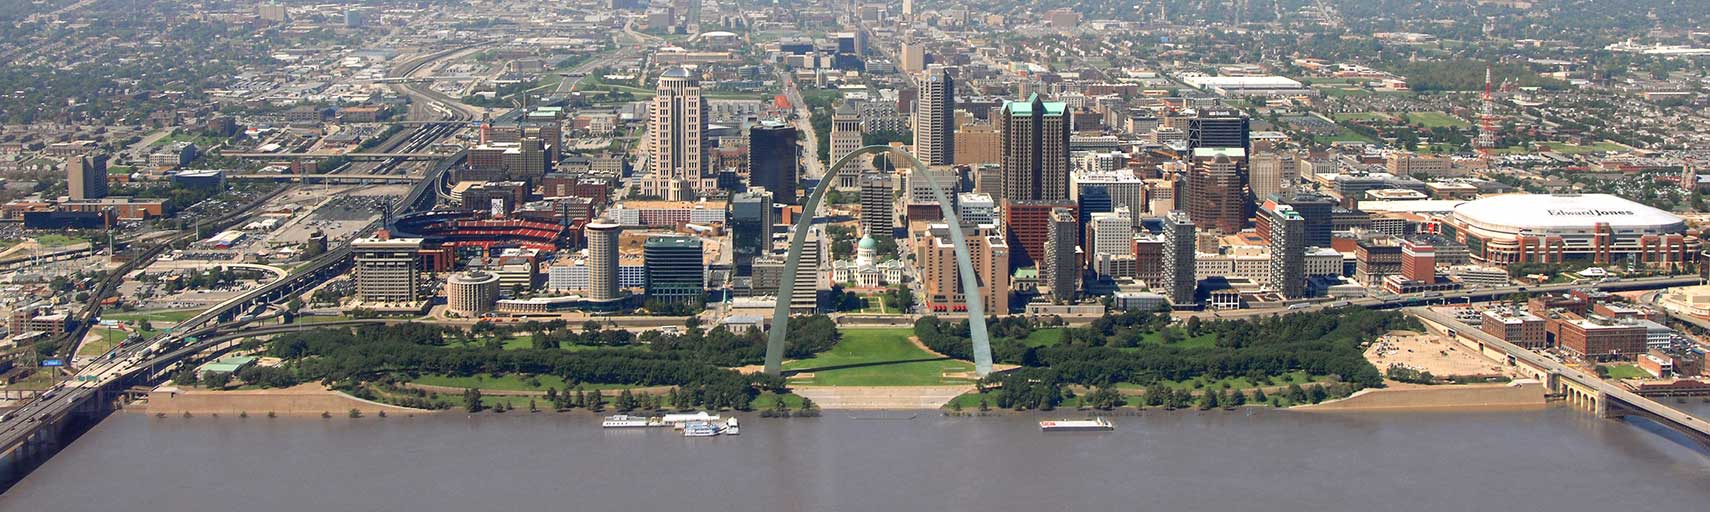 Google Map of the City of Saint Louis, Missouri, USA - Nations Online  Project